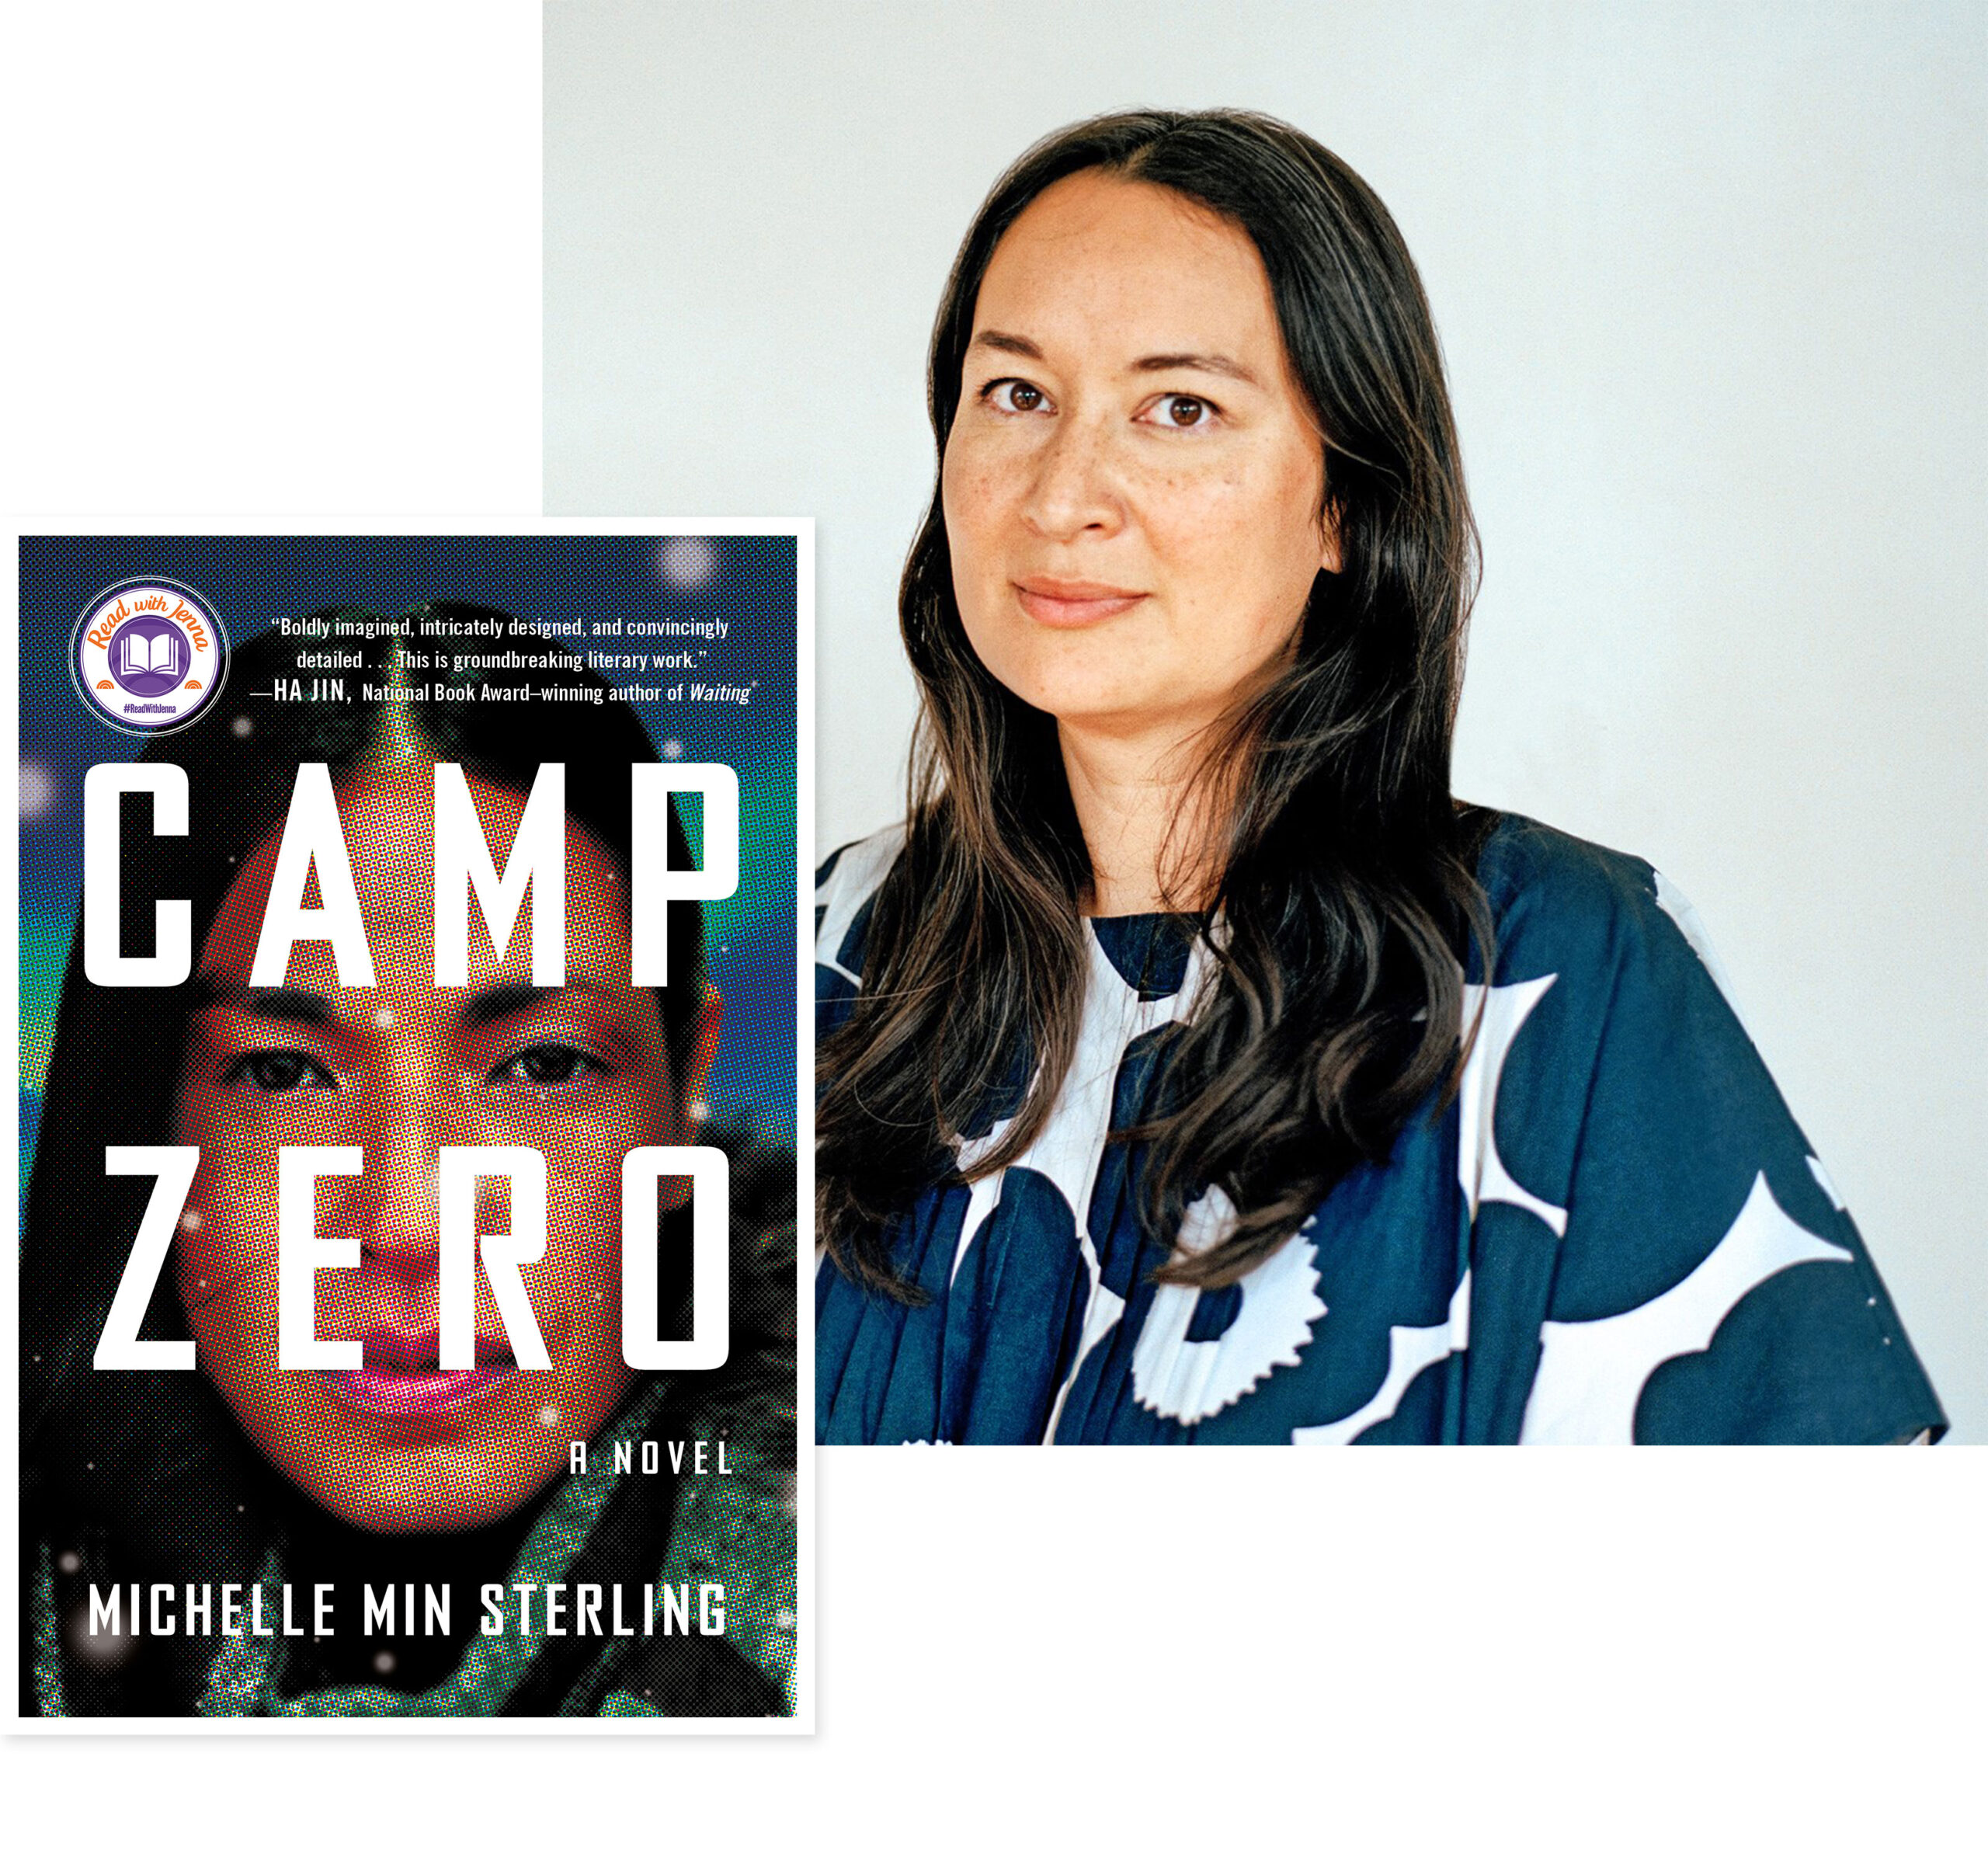 Michelle Min Sterling with her book, Camp Zero